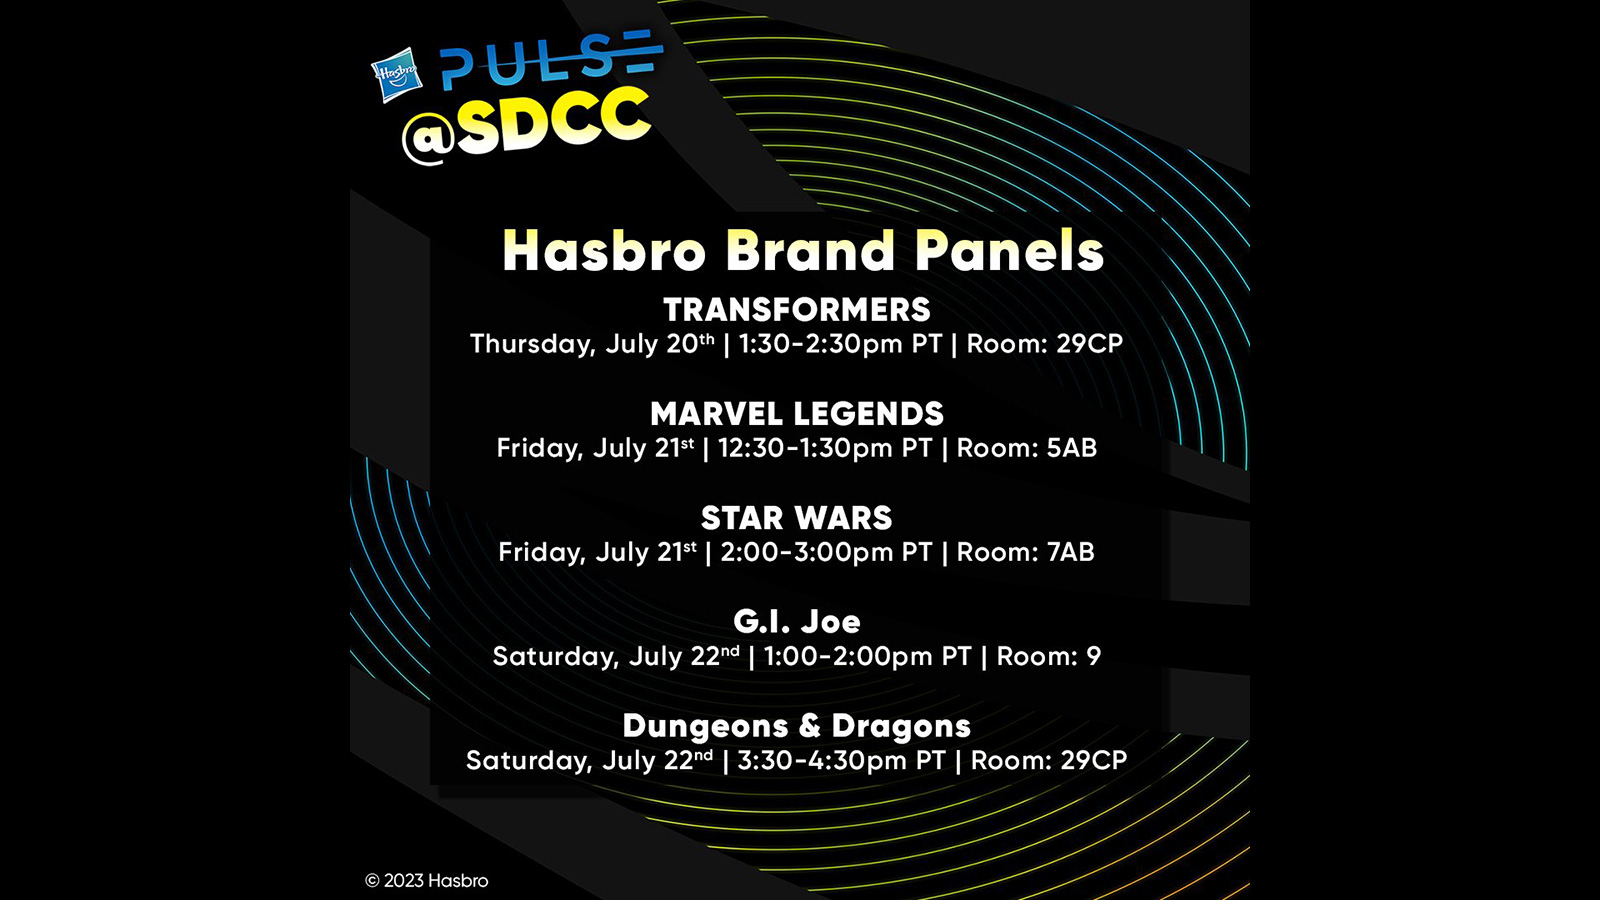 2023 SDCC Hasbro Brand Panel Schedules - Recaps Online Shortly After